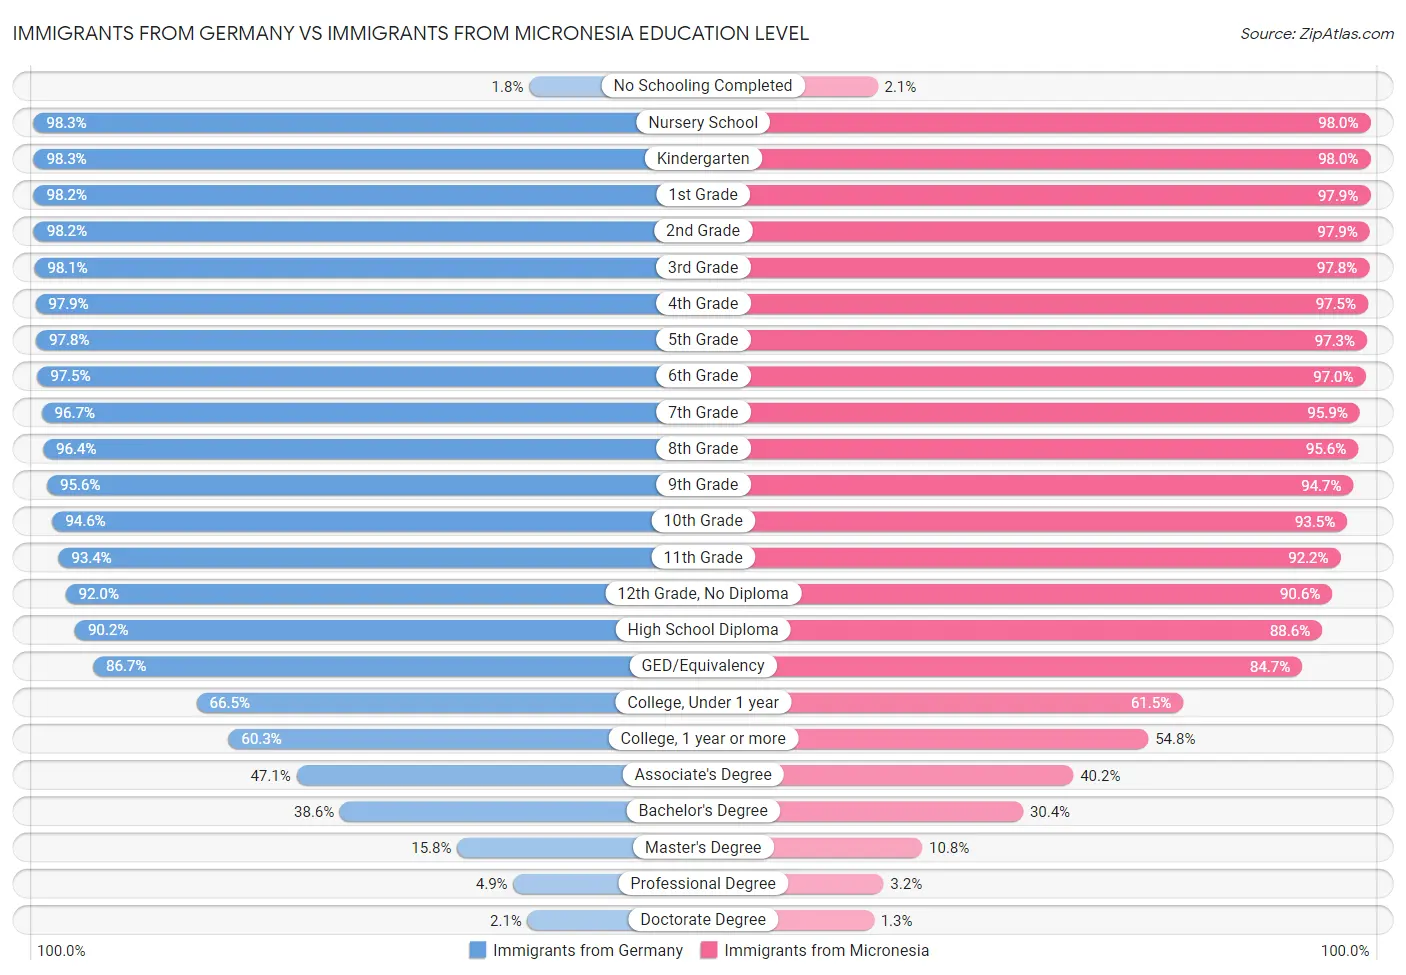 Immigrants from Germany vs Immigrants from Micronesia Education Level